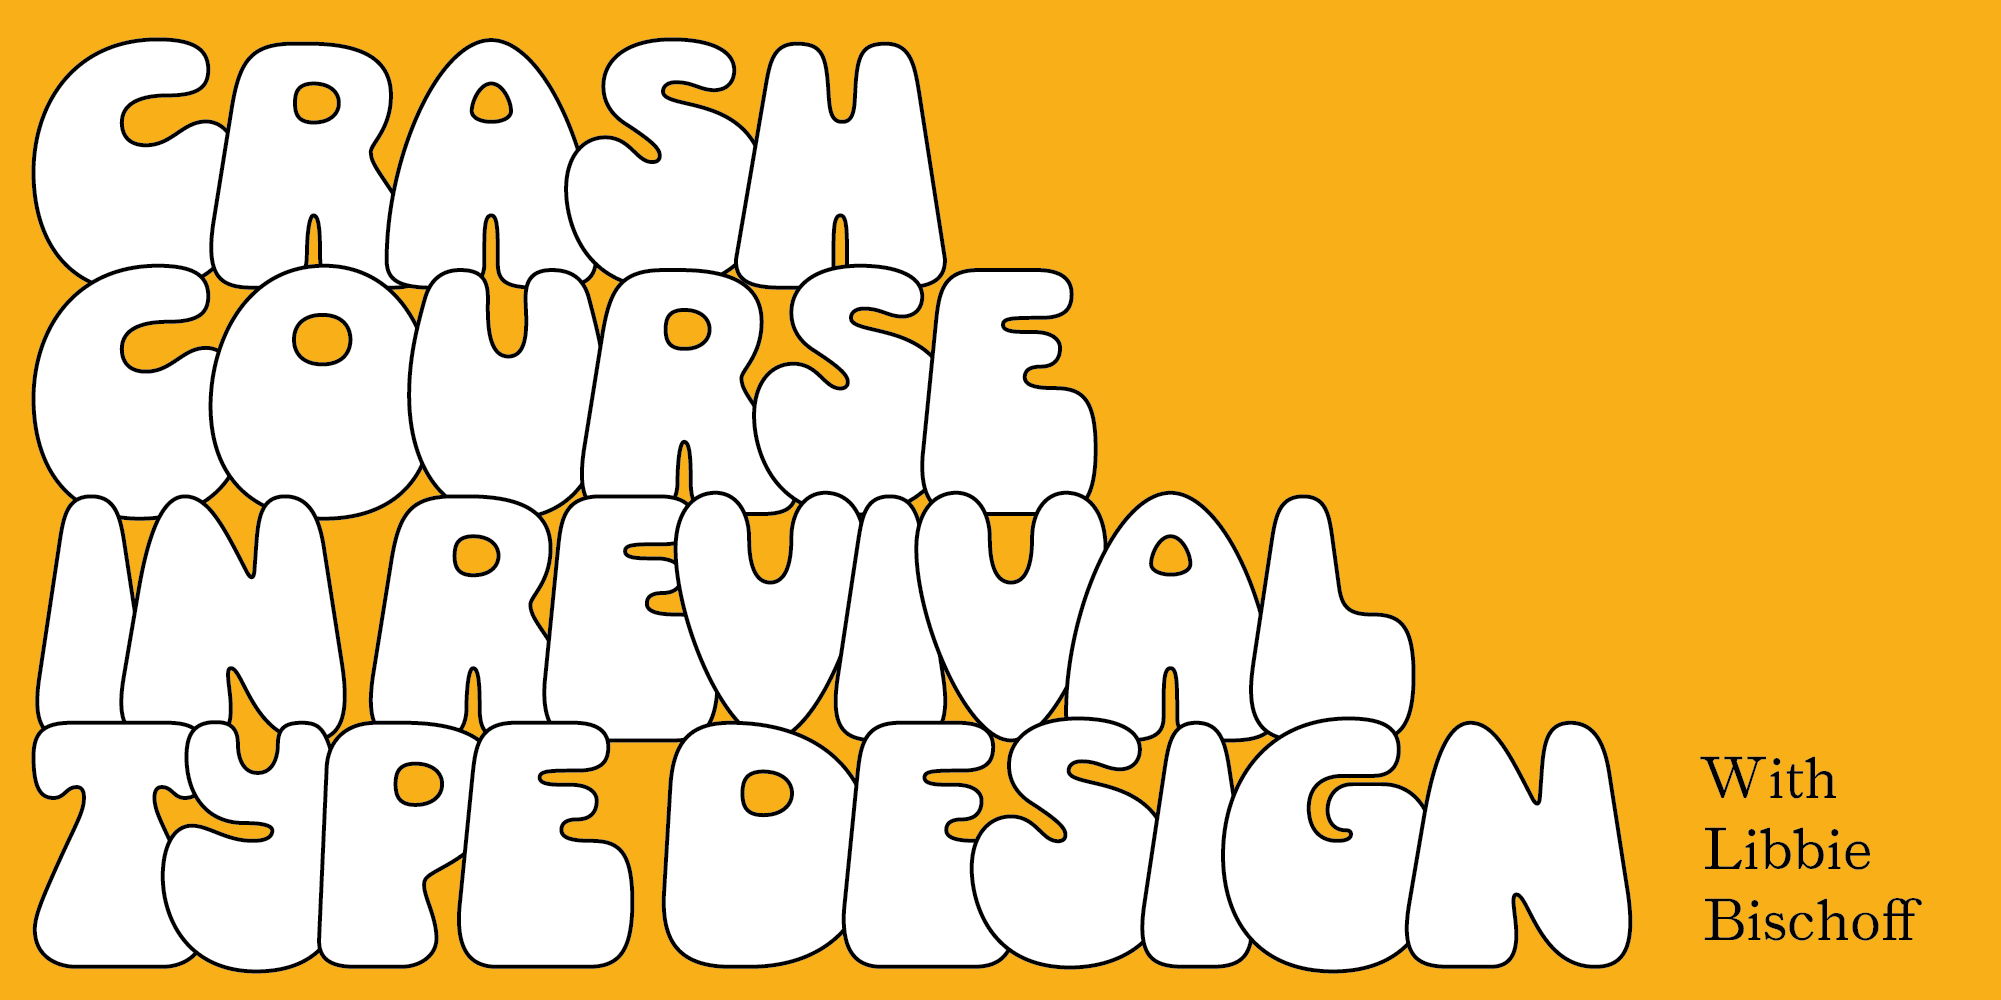 "Crash Course in Revival Type Design" rendered in white bubbly text over an orange background